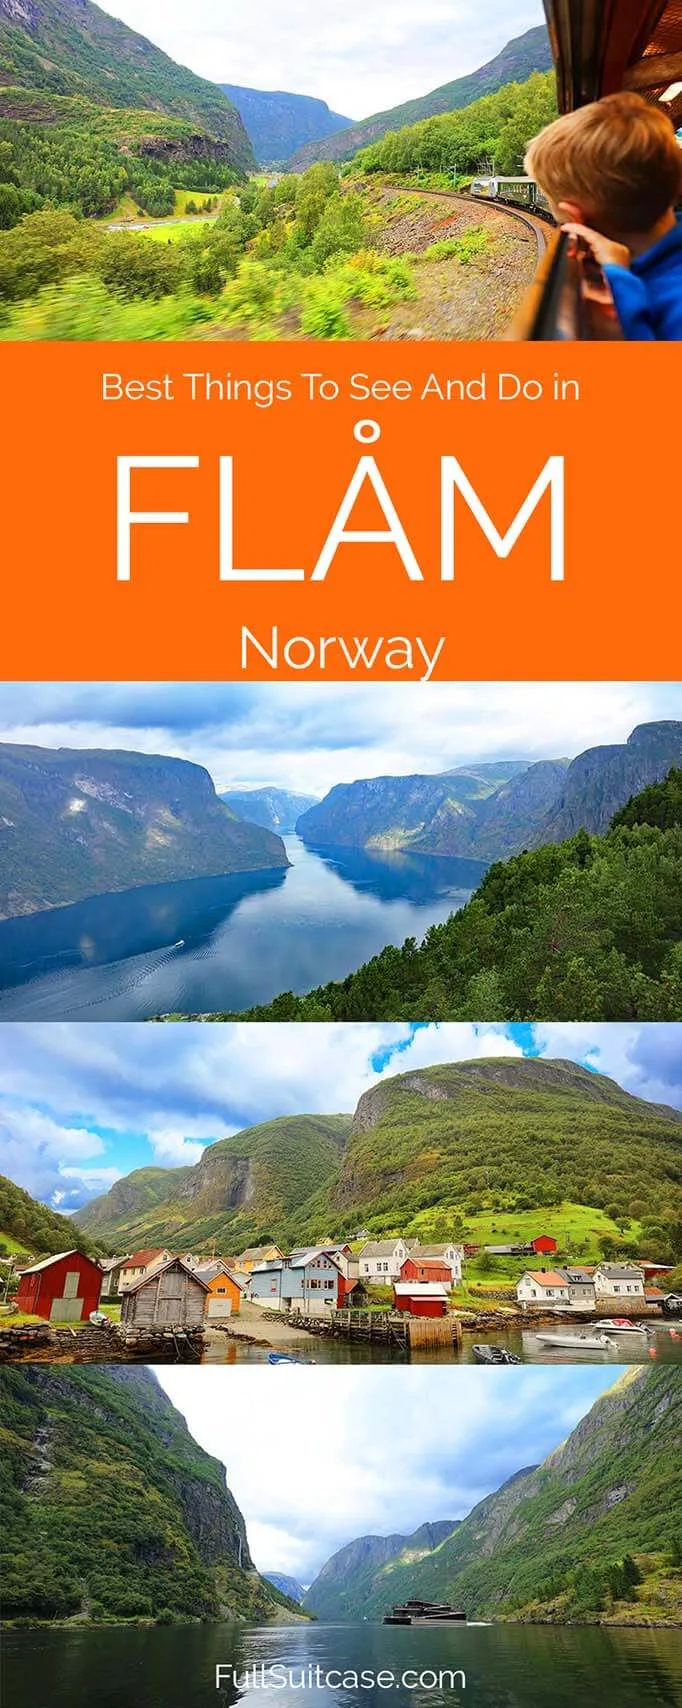 Best things to see and do in Flam Norway, includes suggested one day itinerary. #Flam #Norway